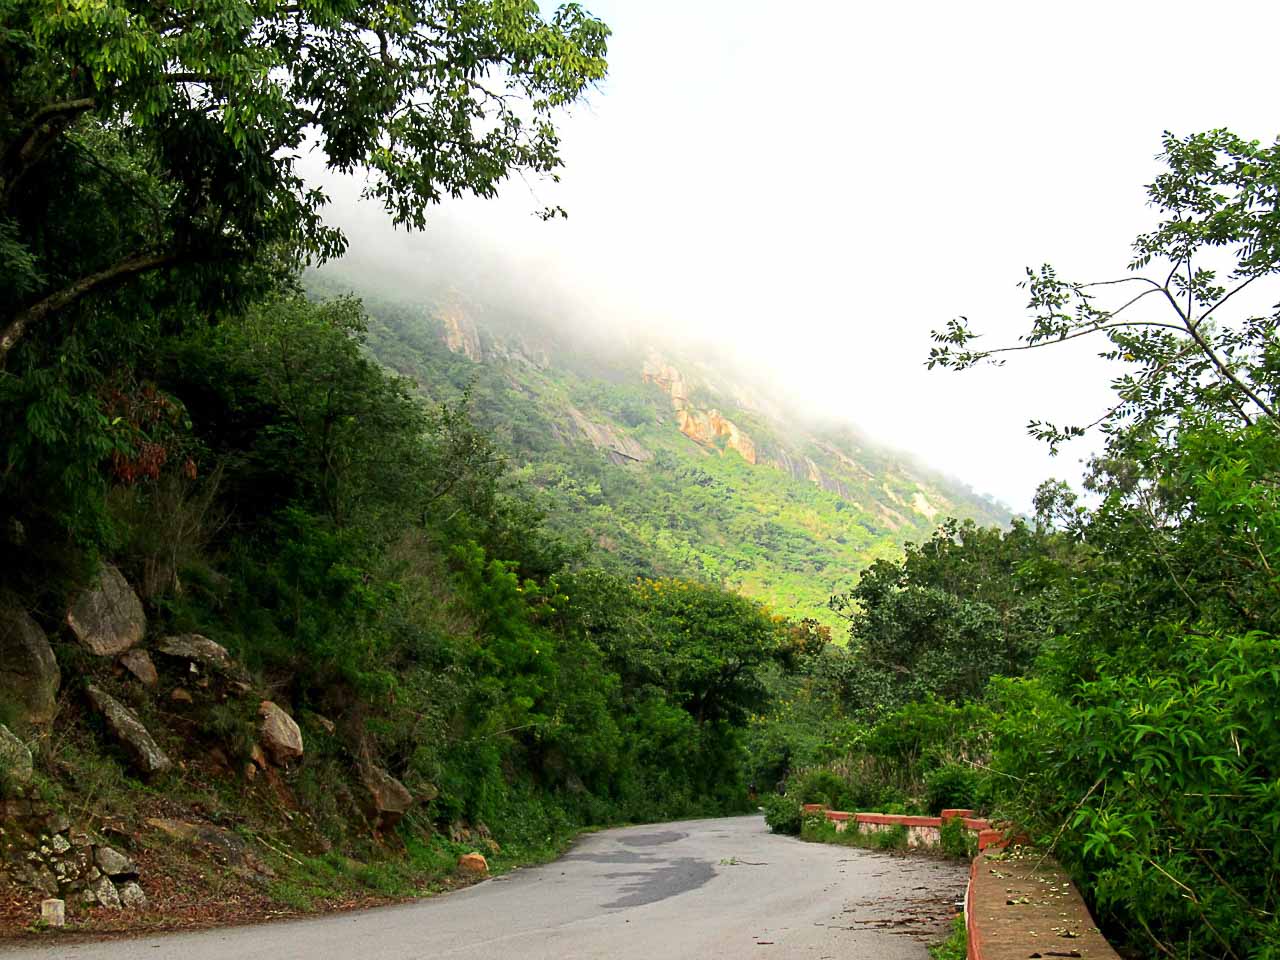 The Nandi hills is one of the top places to visit in Bangalore, add it to your morning itinerary and get a bit of fresh air. 